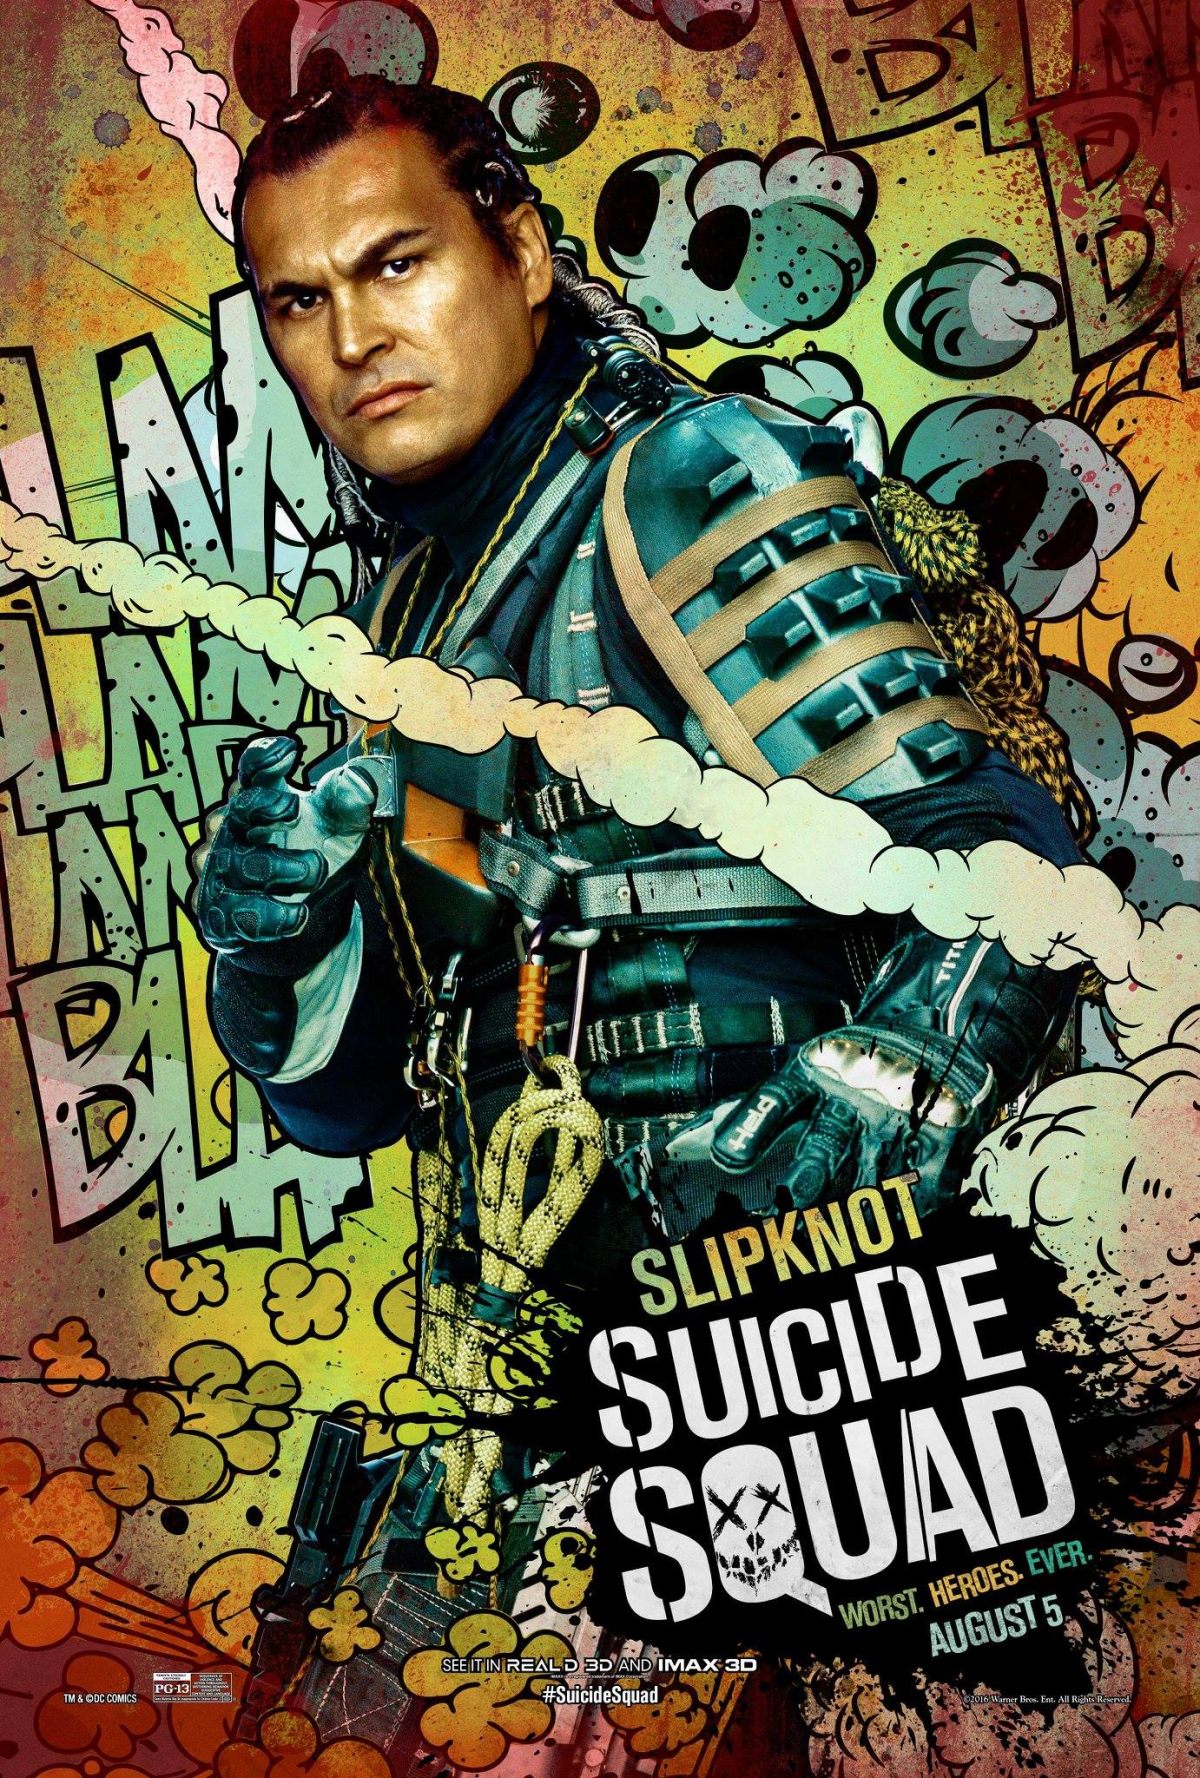 The Suicide Squad Character Posters Revealed - Movie News